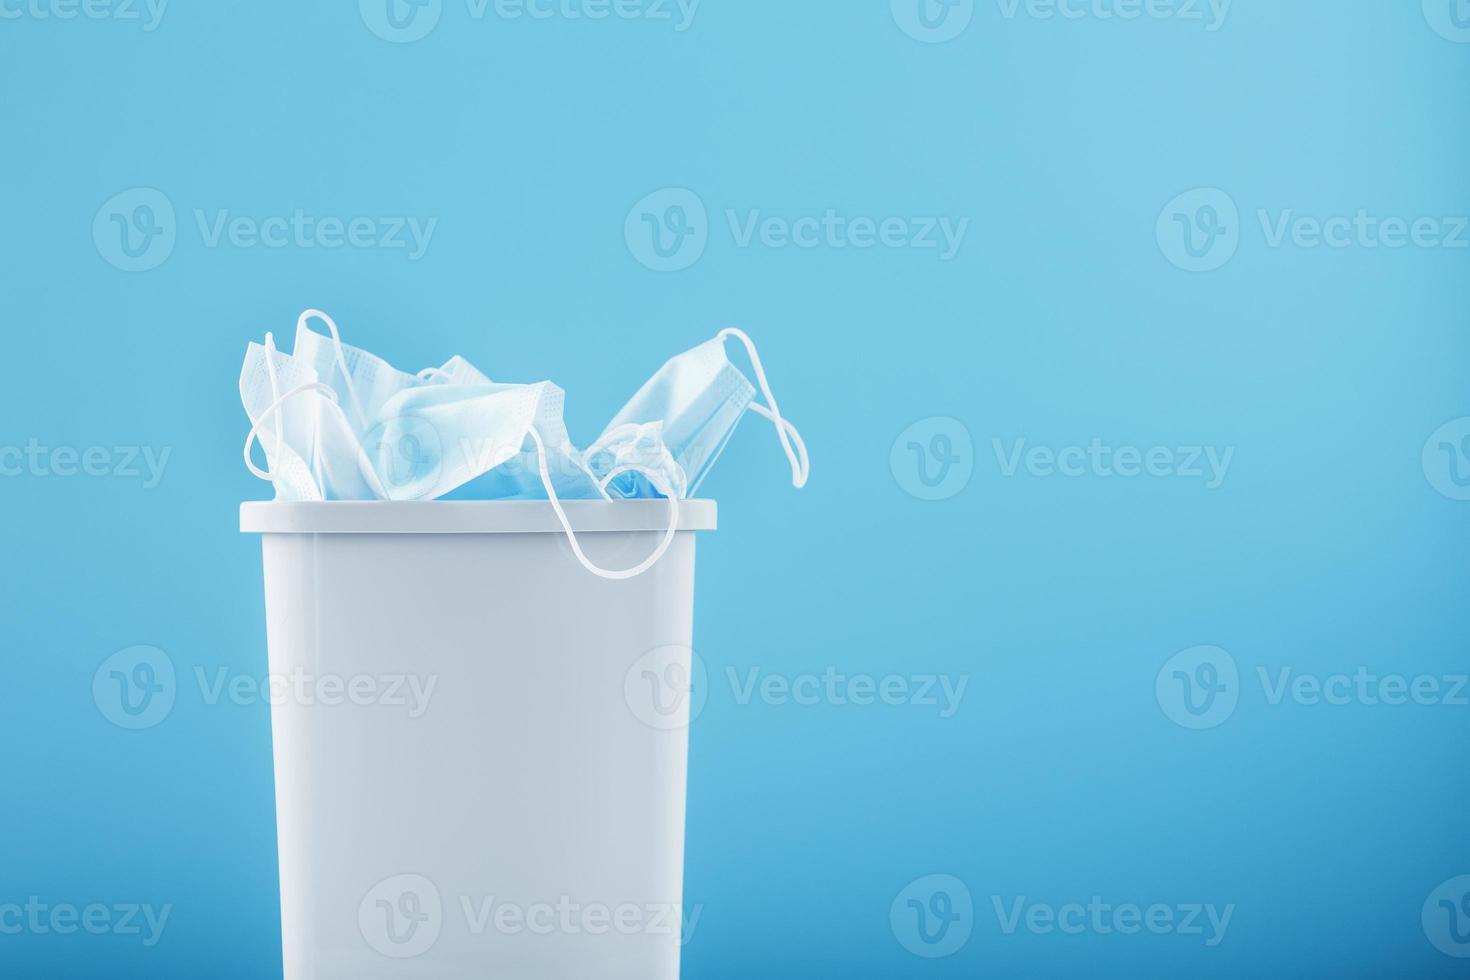 Waste bin full of used protective masks on a light blue background with free space. photo